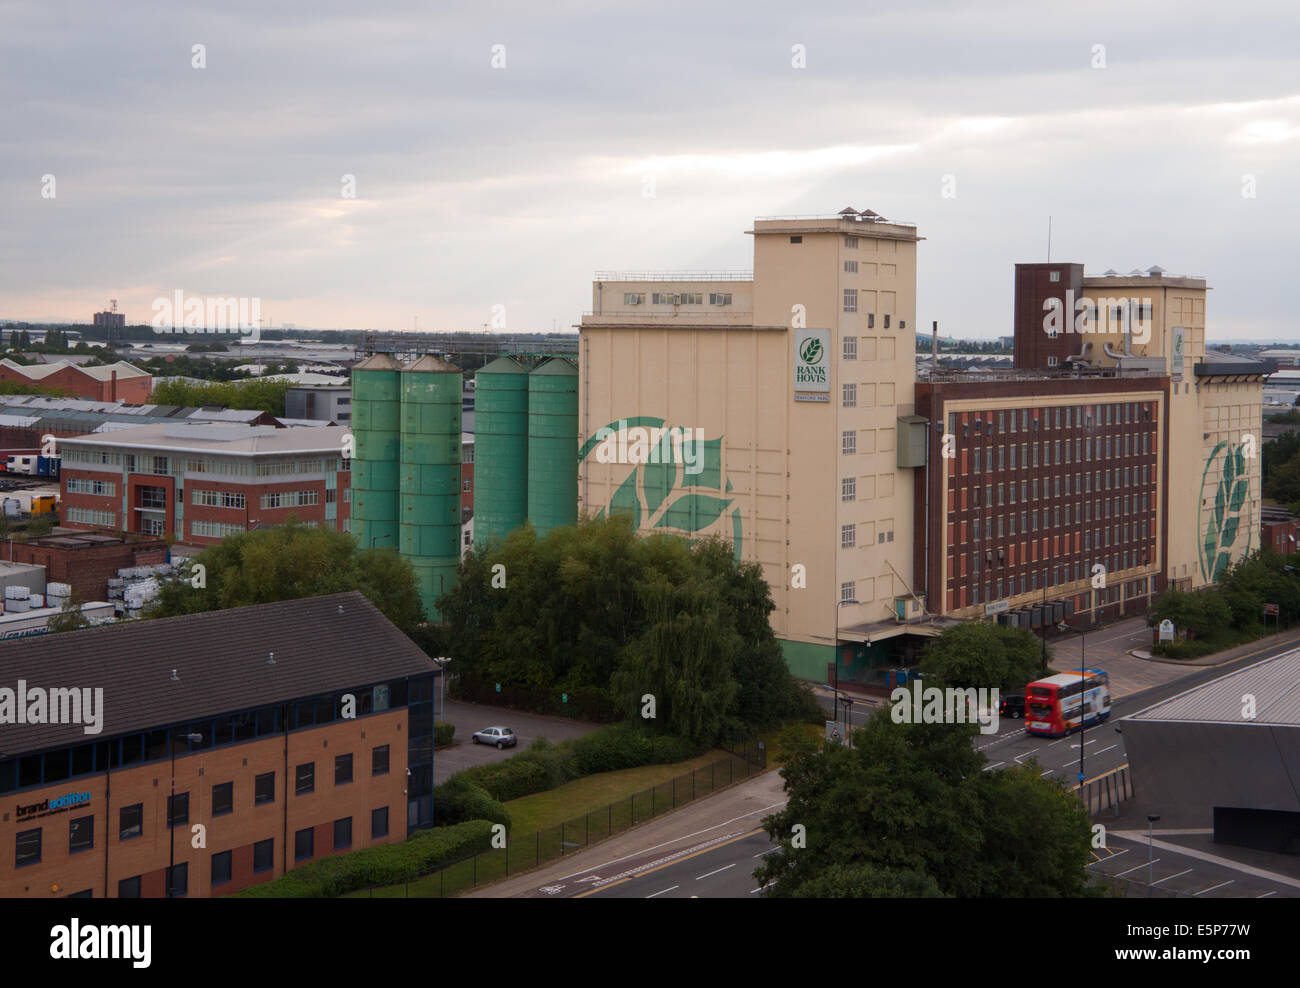 Rank Hovis building at Trafford Park, Salford Quays, Manchester. Stock Photo